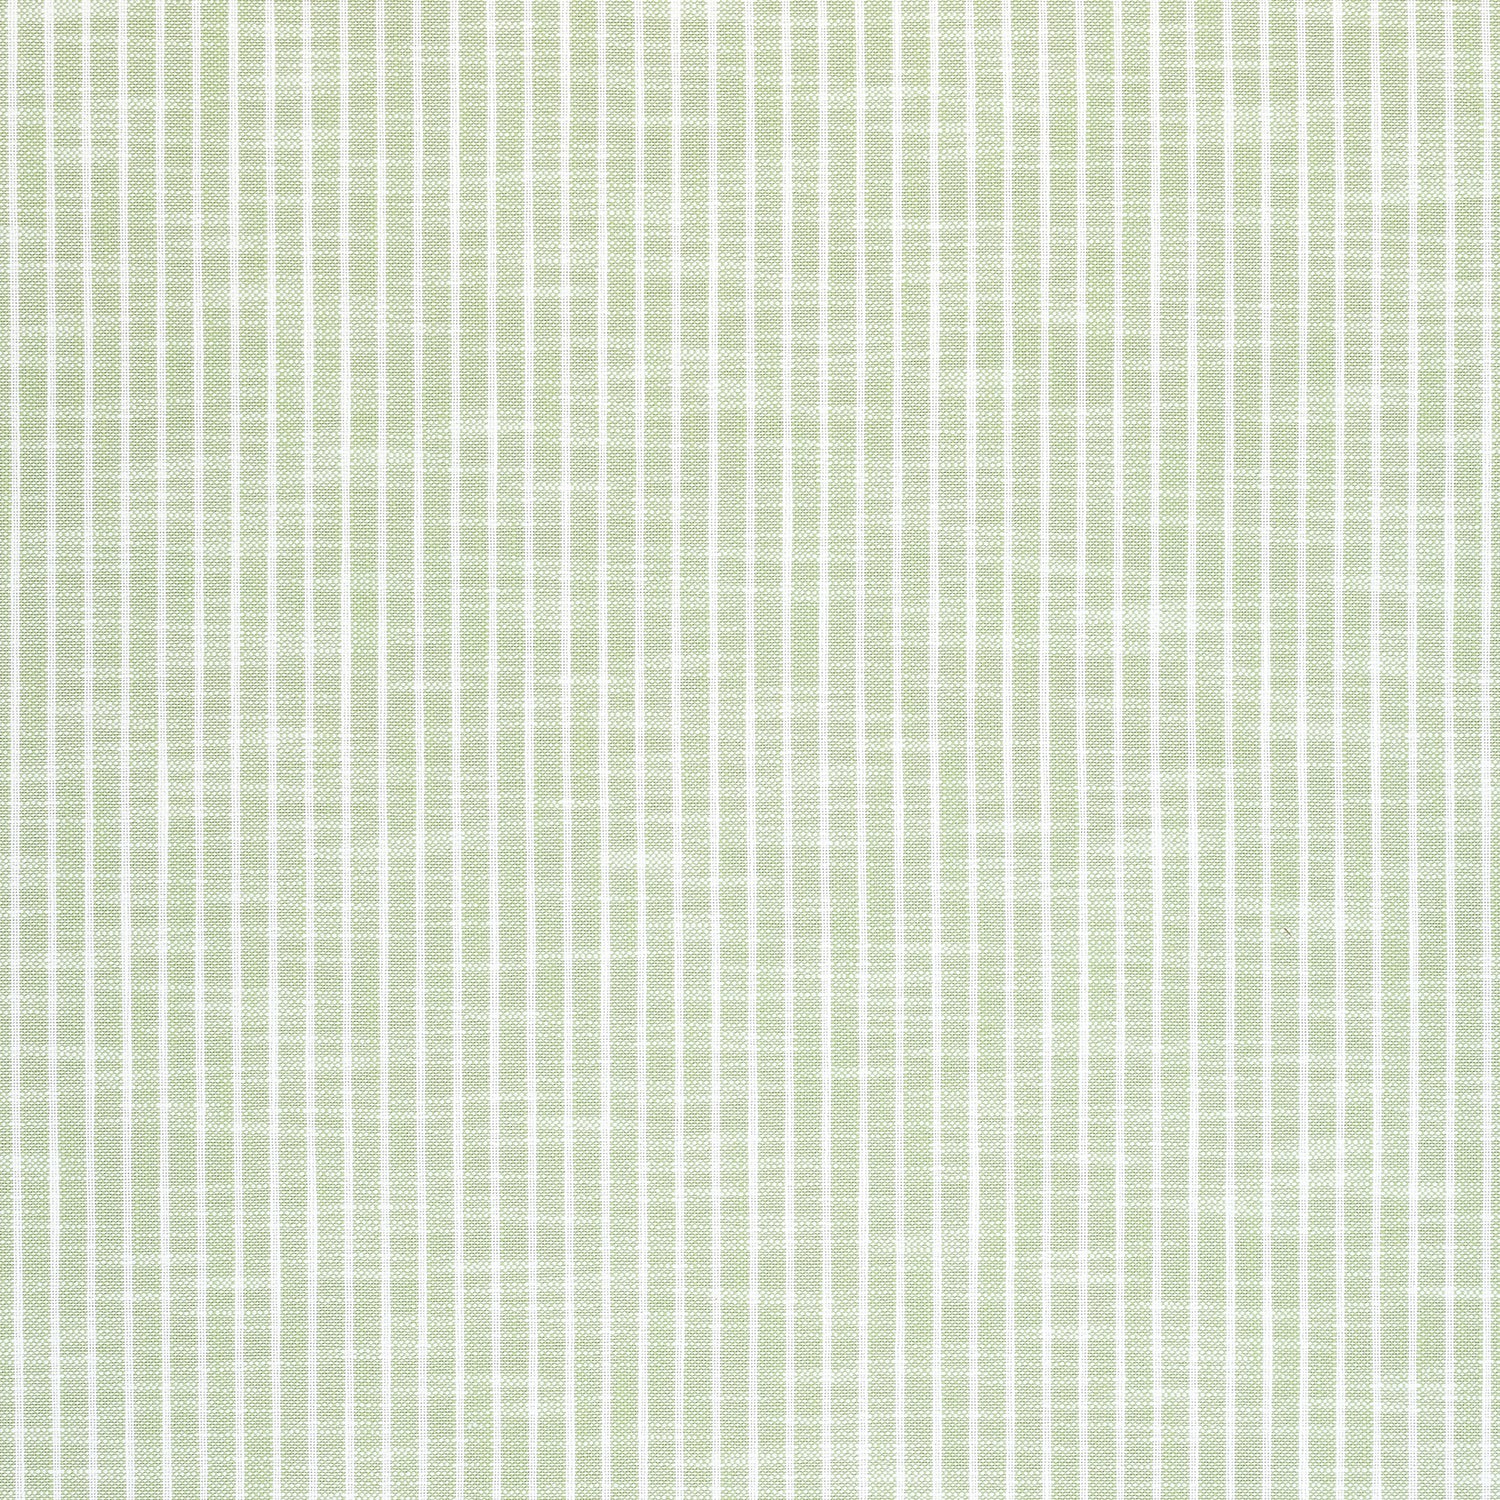 Bayside Stripe fabric in green apple color - pattern number W73473 - by Thibaut in the Landmark collection